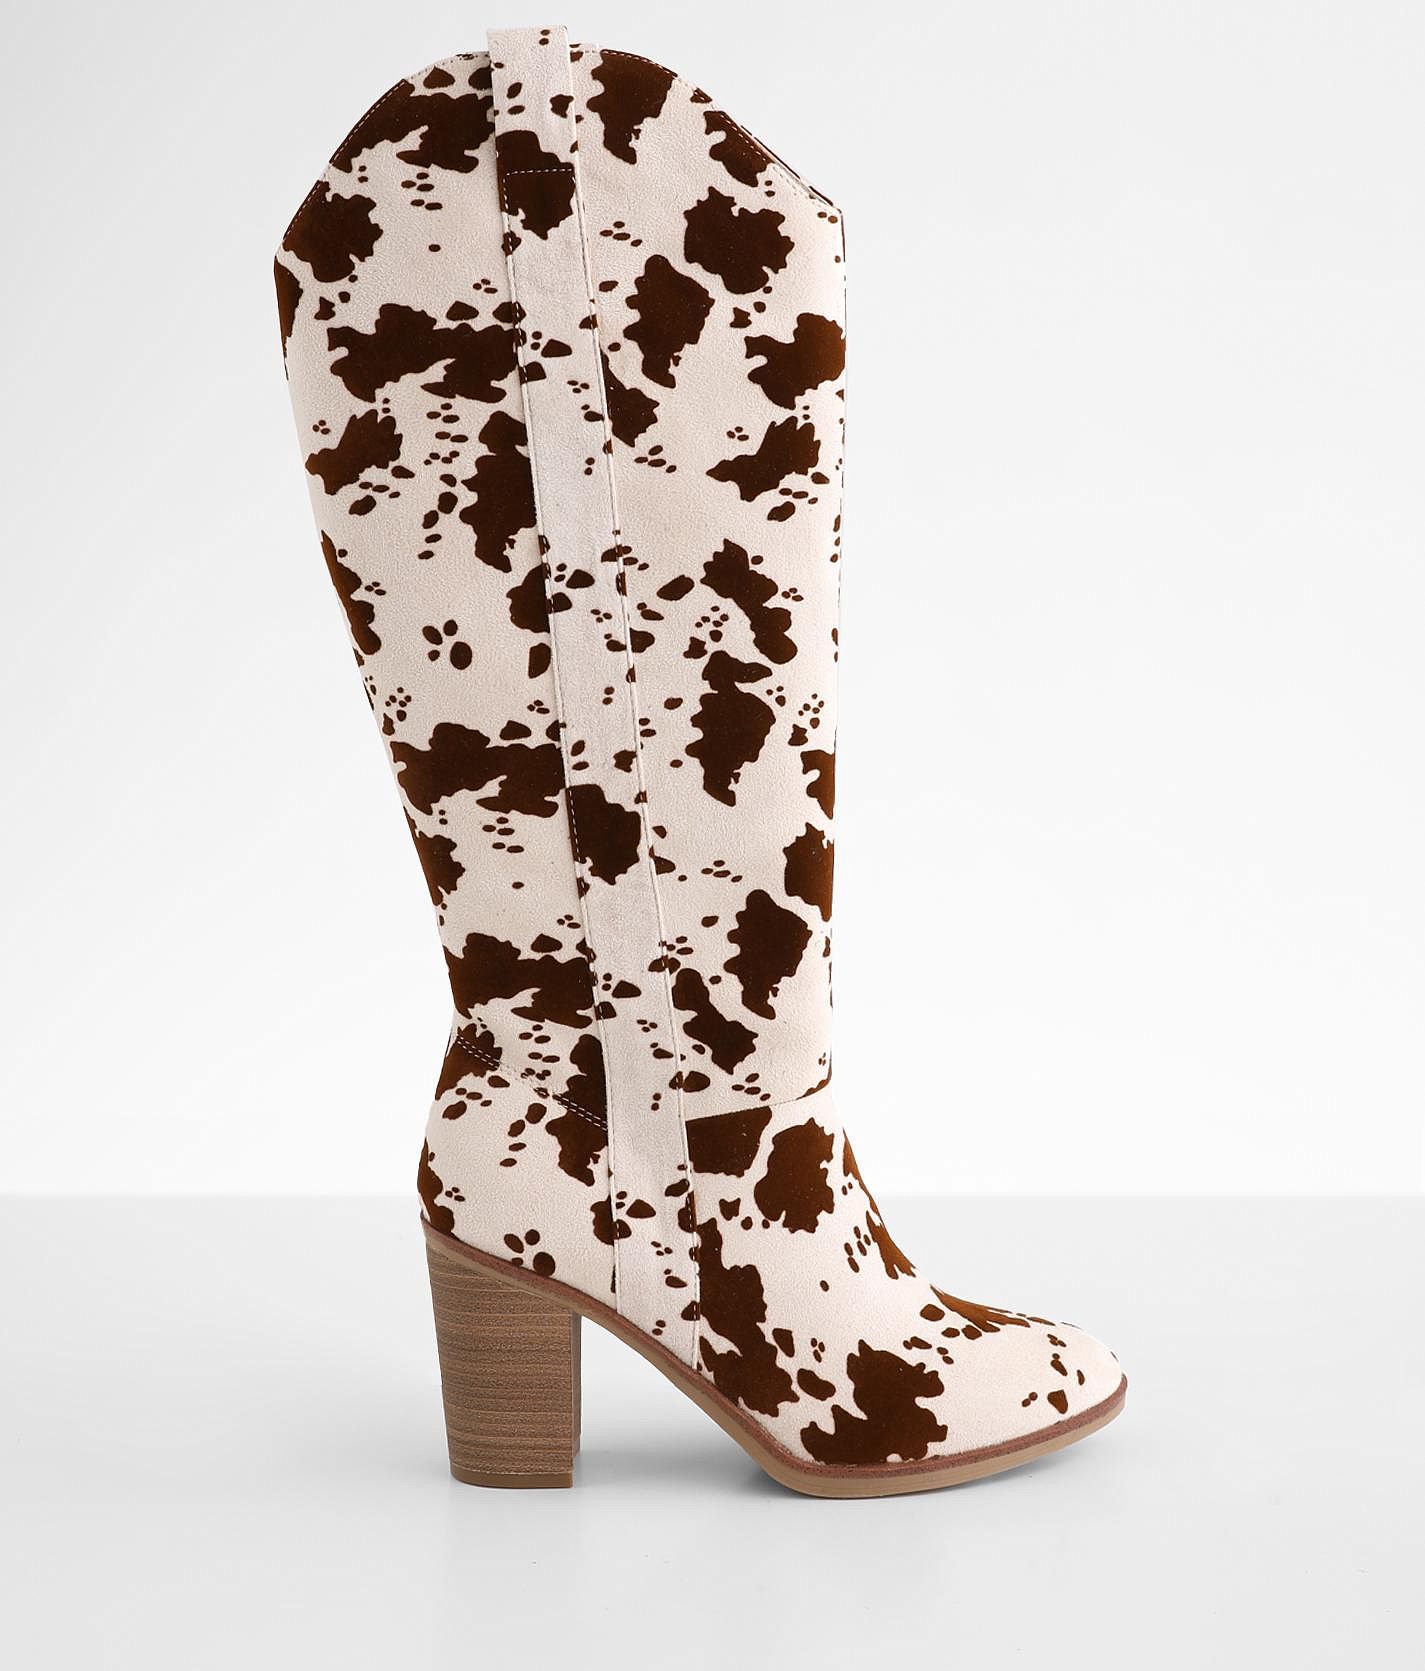 Mia Lorayne Cow Print Tall Boot - Women's Shoes in Brown Cow | Buckle